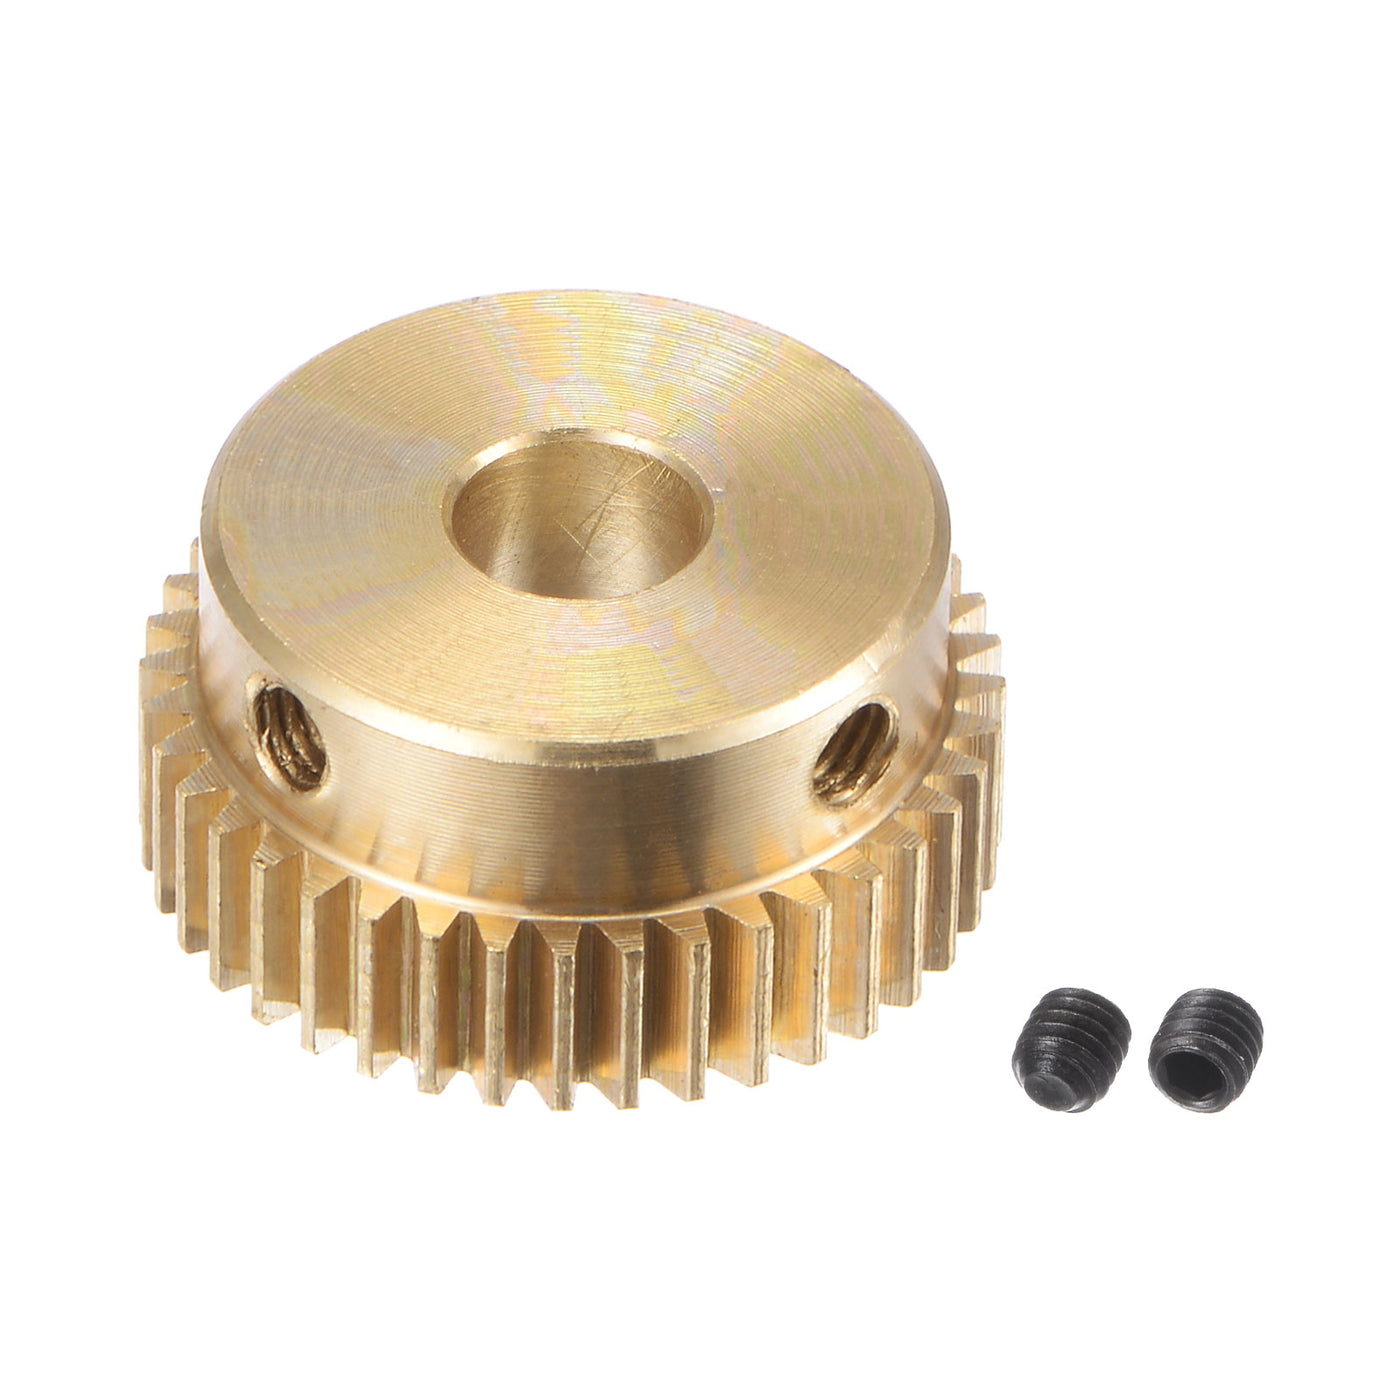 uxcell Uxcell 0.5 Mod 40T 5mm Bore 21mm Outer Dia Brass Motor Rack Pinion Gear with Screws